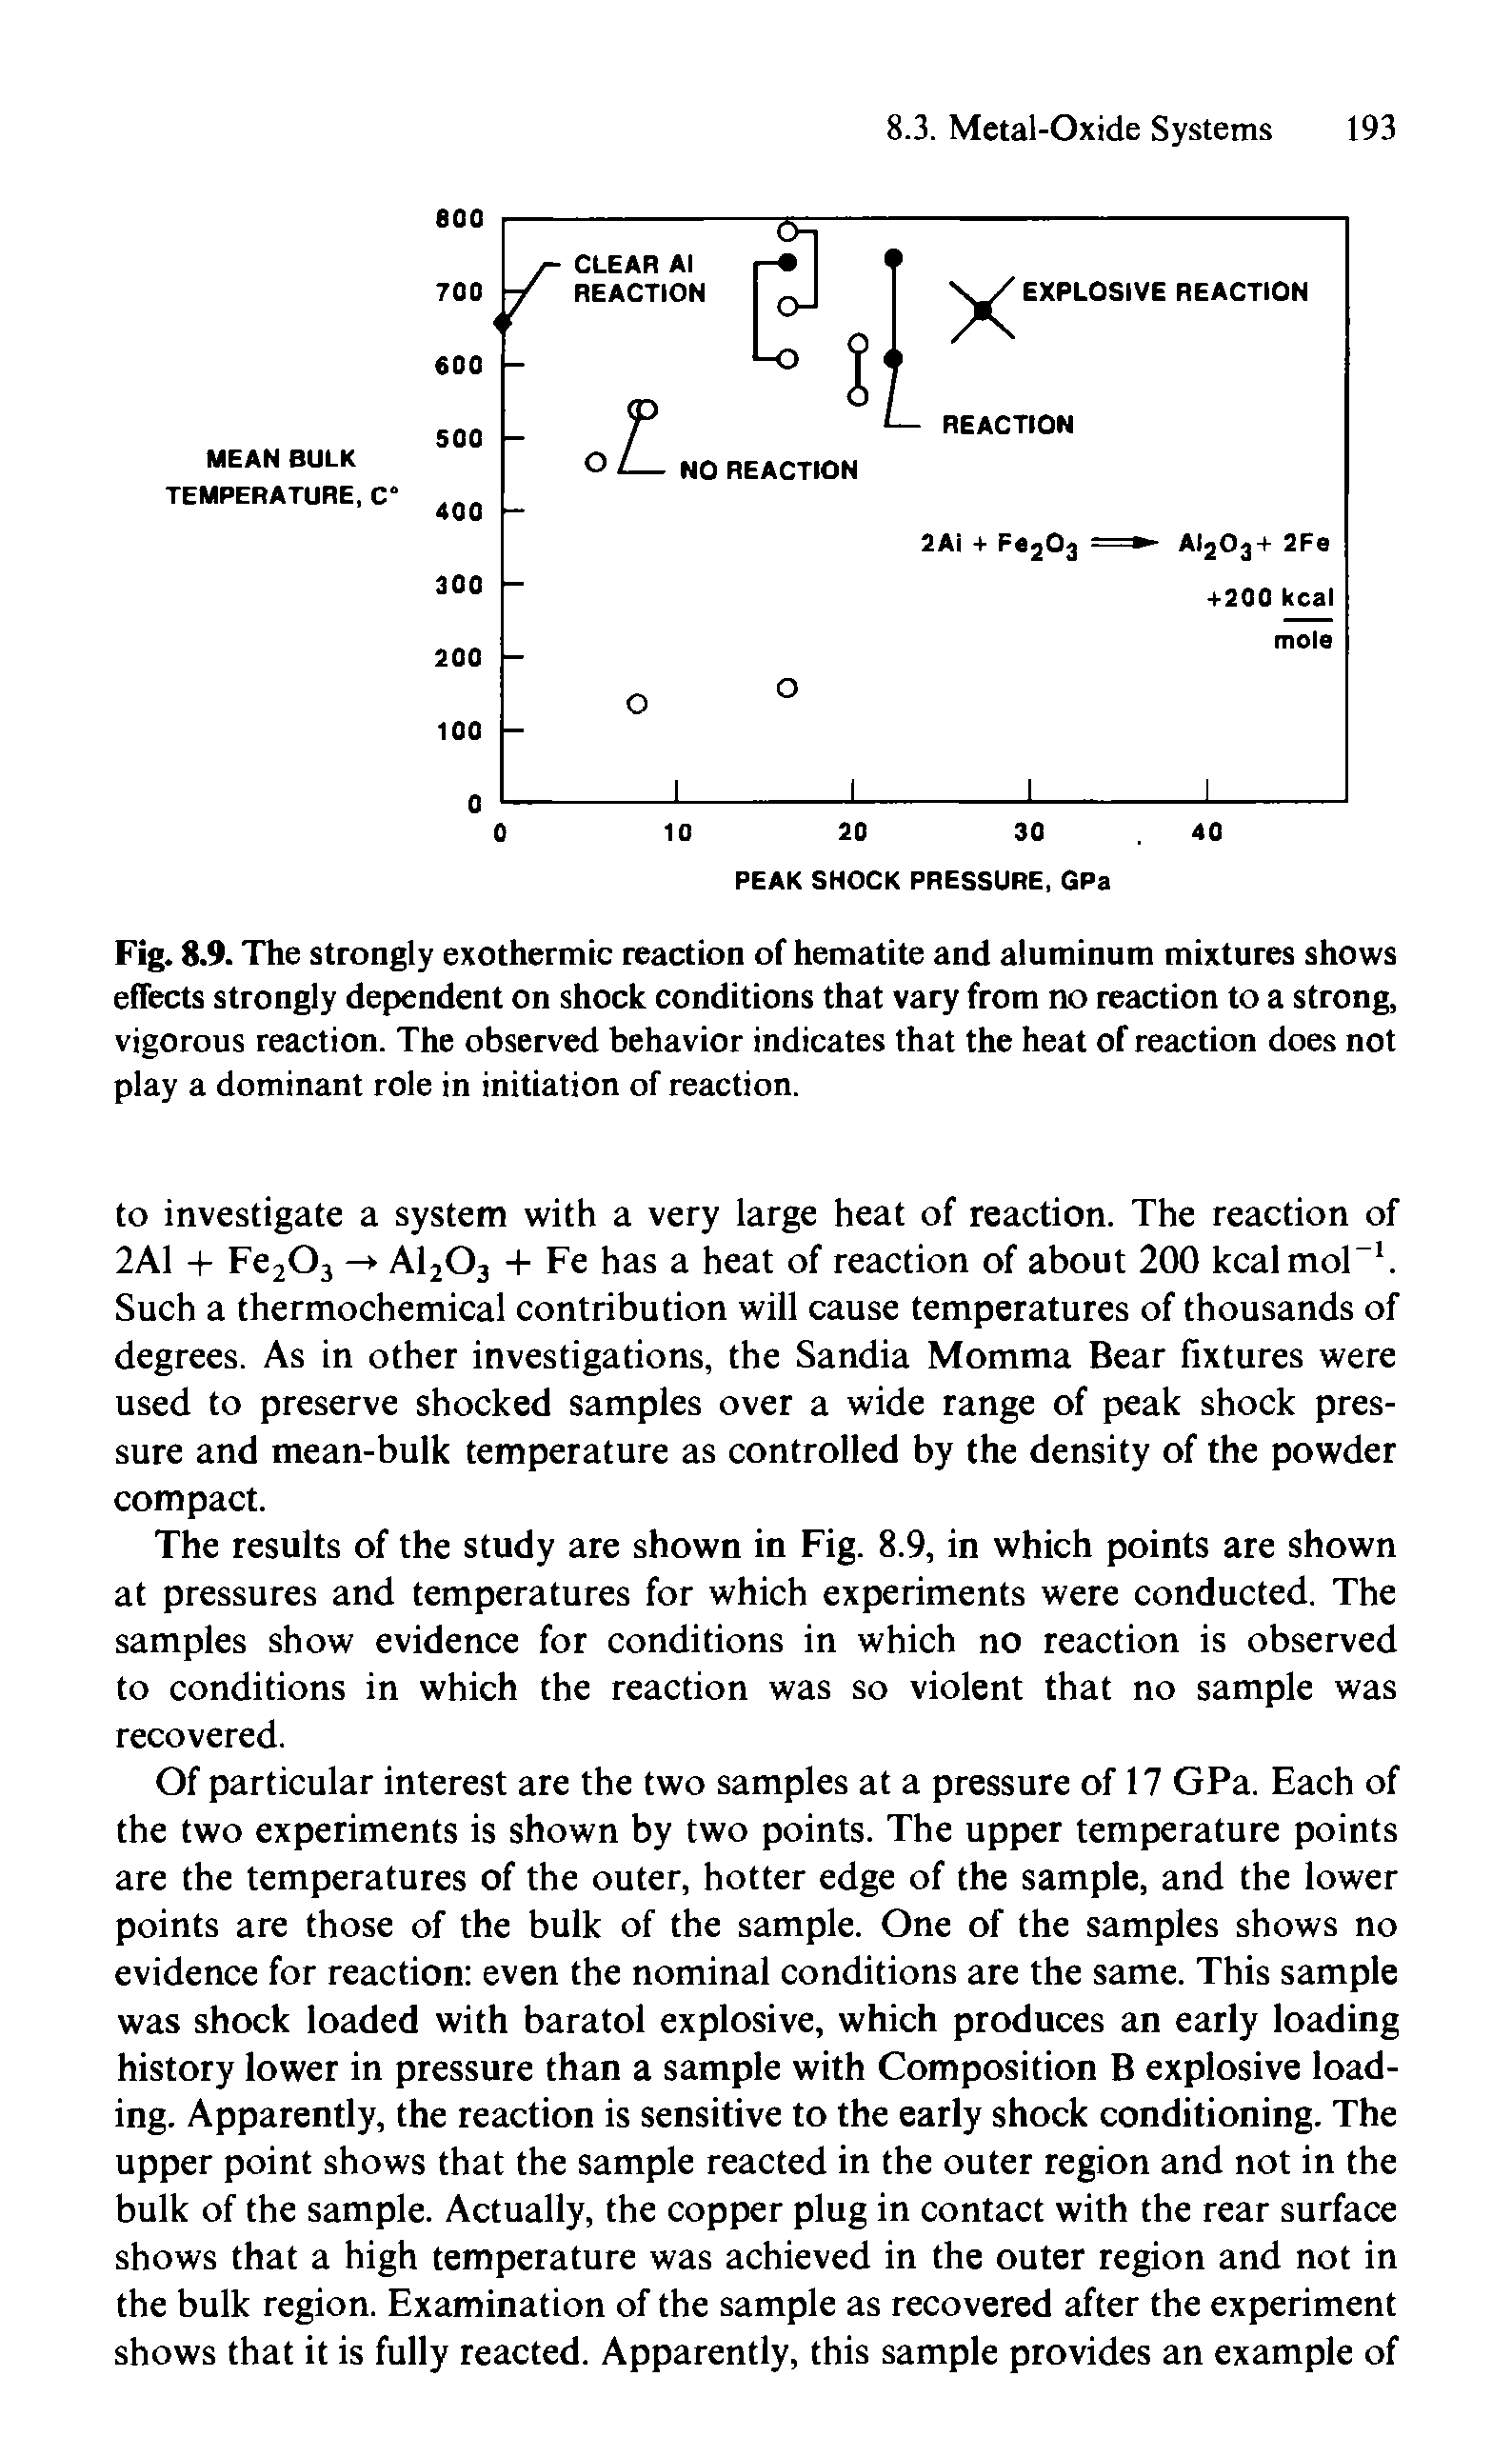 Fig. 8.9. The strongly exothermic reaction of hematite and aluminum mixtures shows effects strongly dependent on shock conditions that vary from no reaction to a strong, vigorous reaction. The observed behavior indicates that the heat of reaction does not play a dominant role in initiation of reaction.